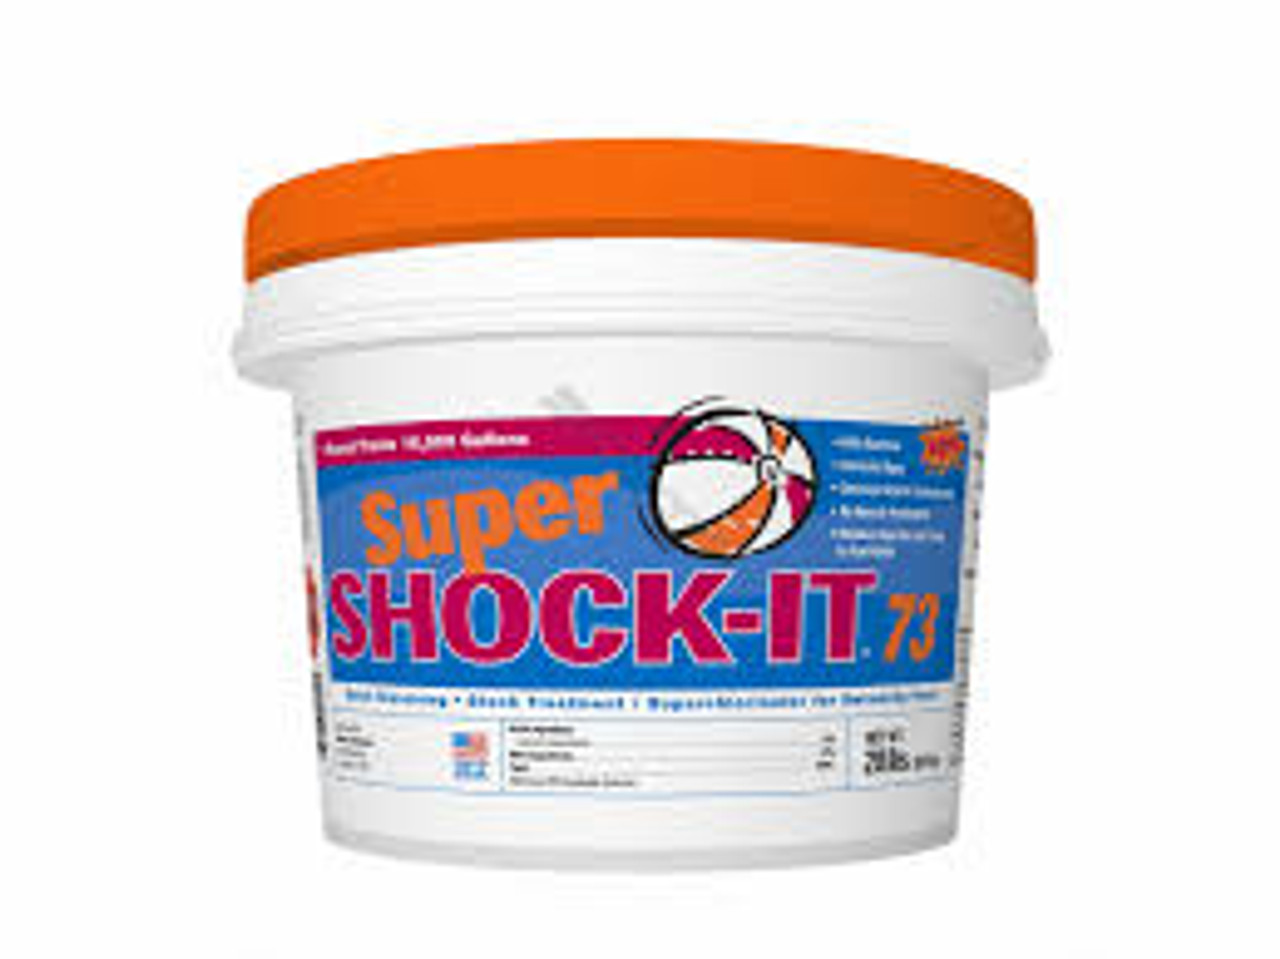 PPG, HTH, 24 PACK, 24lb,1 LB, bag, swimming pool, CALCIUM, PPG-50-1271, HYPOCHLORITE, 4 PACK, 1 LB, of, Super, Ultra, Shock, Shock-It, 73%, Strength, FREE SHIPPING, W8001606, swimming pool, shock, granular, no, residual, dust free, regal, hth, Soluble, bag, pail, bucket, w8001605